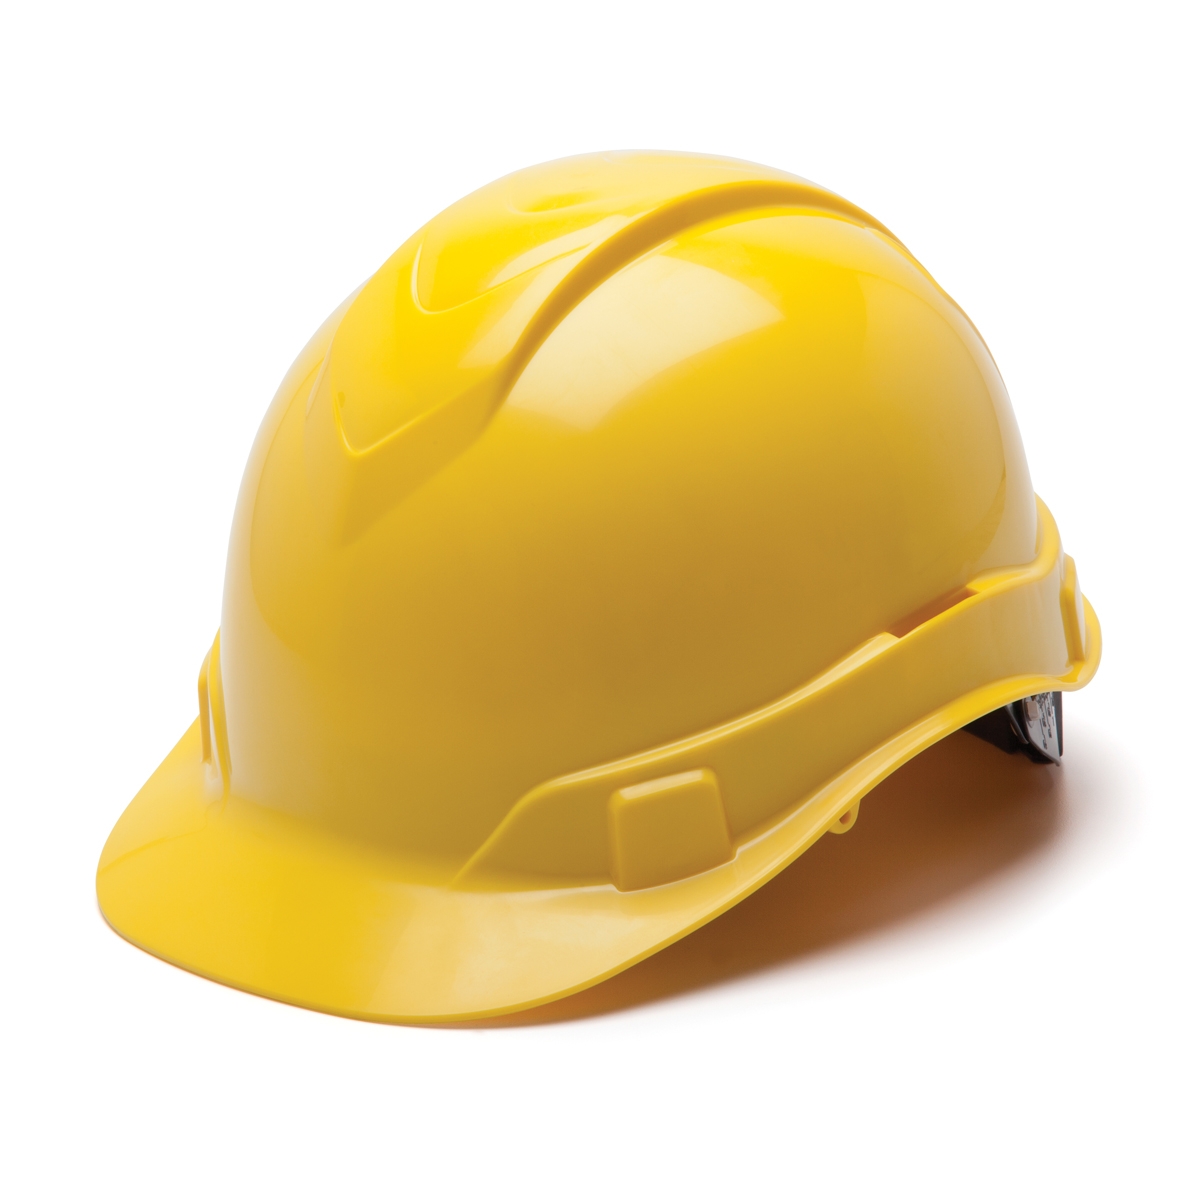 Pyramex Ridgeline Cap Style Hard Hat with 4 Point Ratchet Suspension from GME Supply